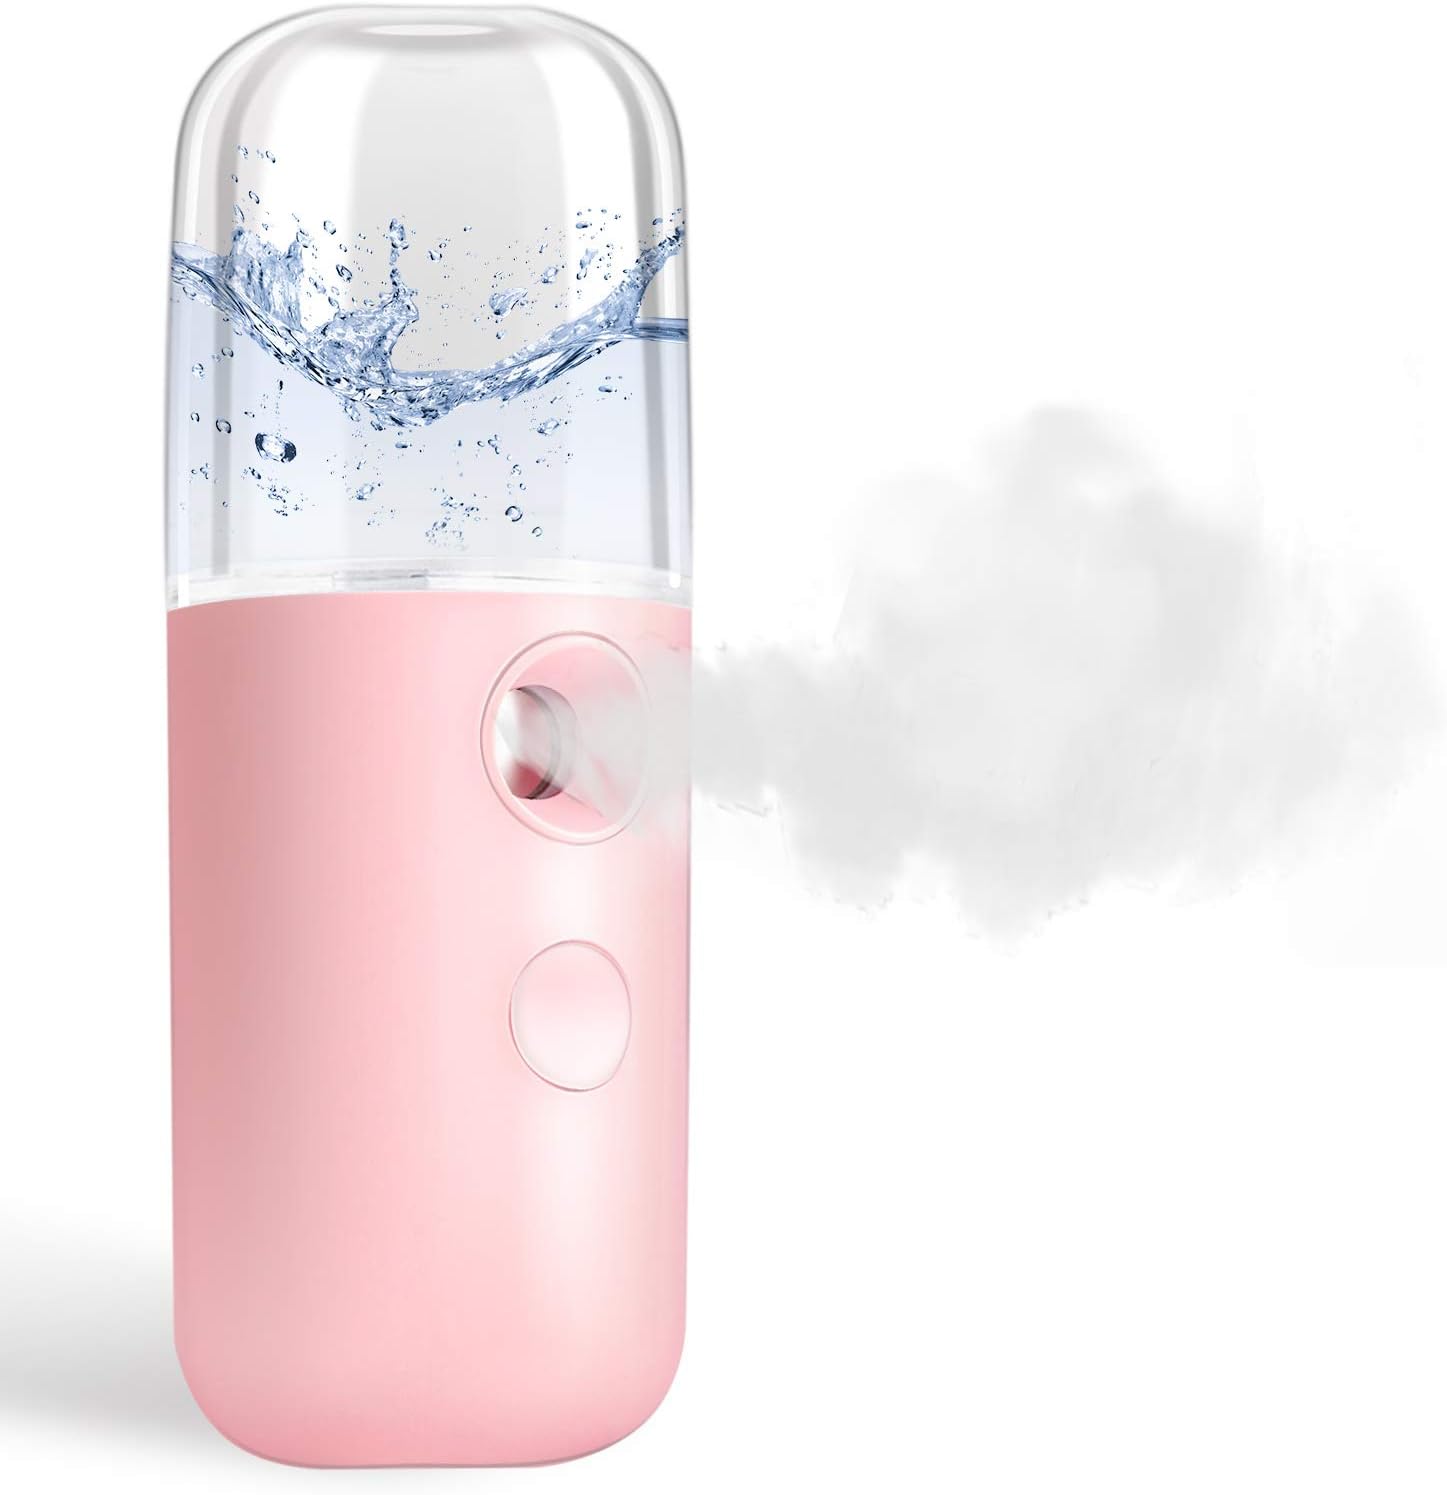 GIVERARE Nano Facial Steamer, Handy Mini Mister, USB Rechargeable Mist Sprayer, 30ml Visual Water Tank MoisturizingHydrating for Face, Daily Makeup, Skin Care, Eyelash Extensions-Pink